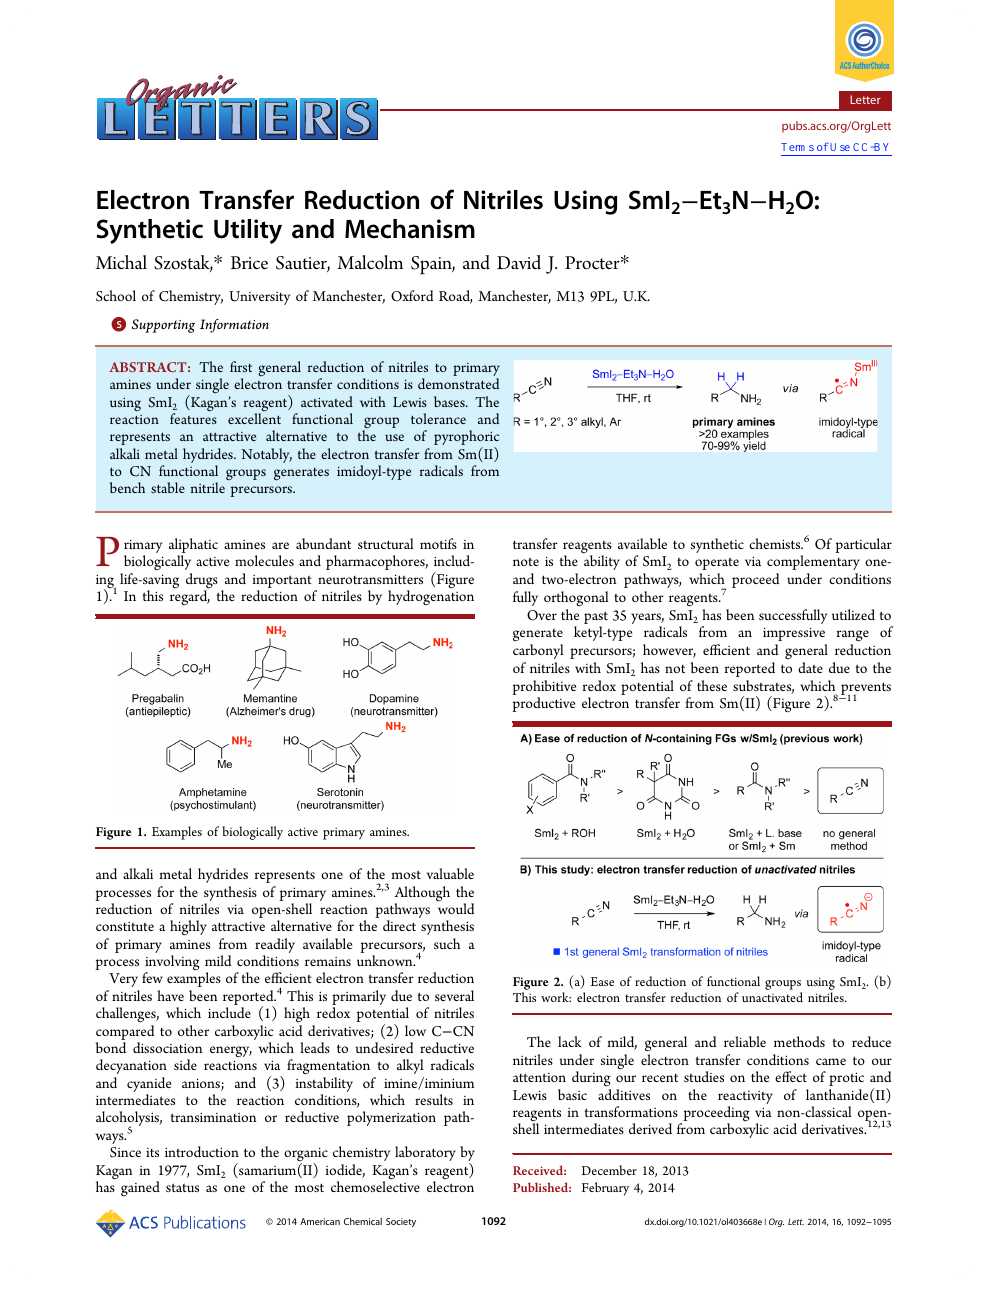 Electron Transfer Reduction Of Nitriles Using Smi 2 Et 3 N H 2 O Synthetic Utility And Mechanism Topic Of Research Paper In Chemical Sciences Download Scholarly Article Pdf And Read For